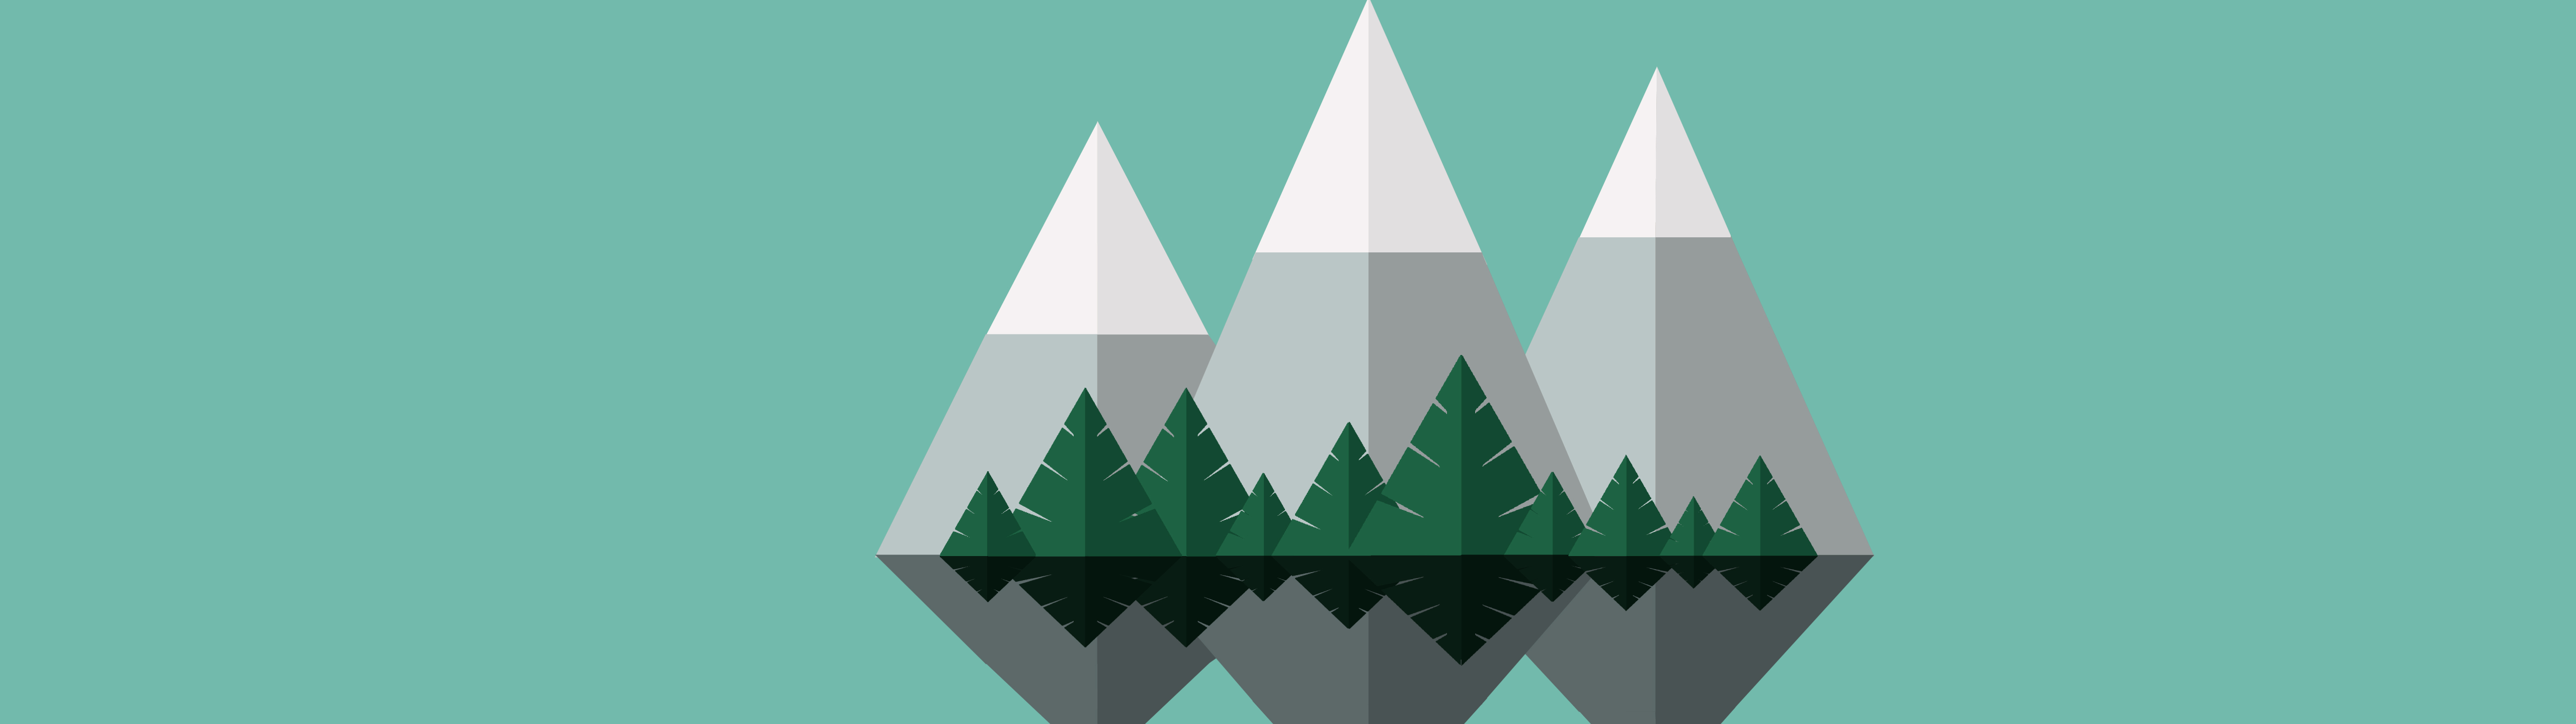 5120x1440 Minimal Mountains In Day 5120x1440 Resolution Wallpaper Hd